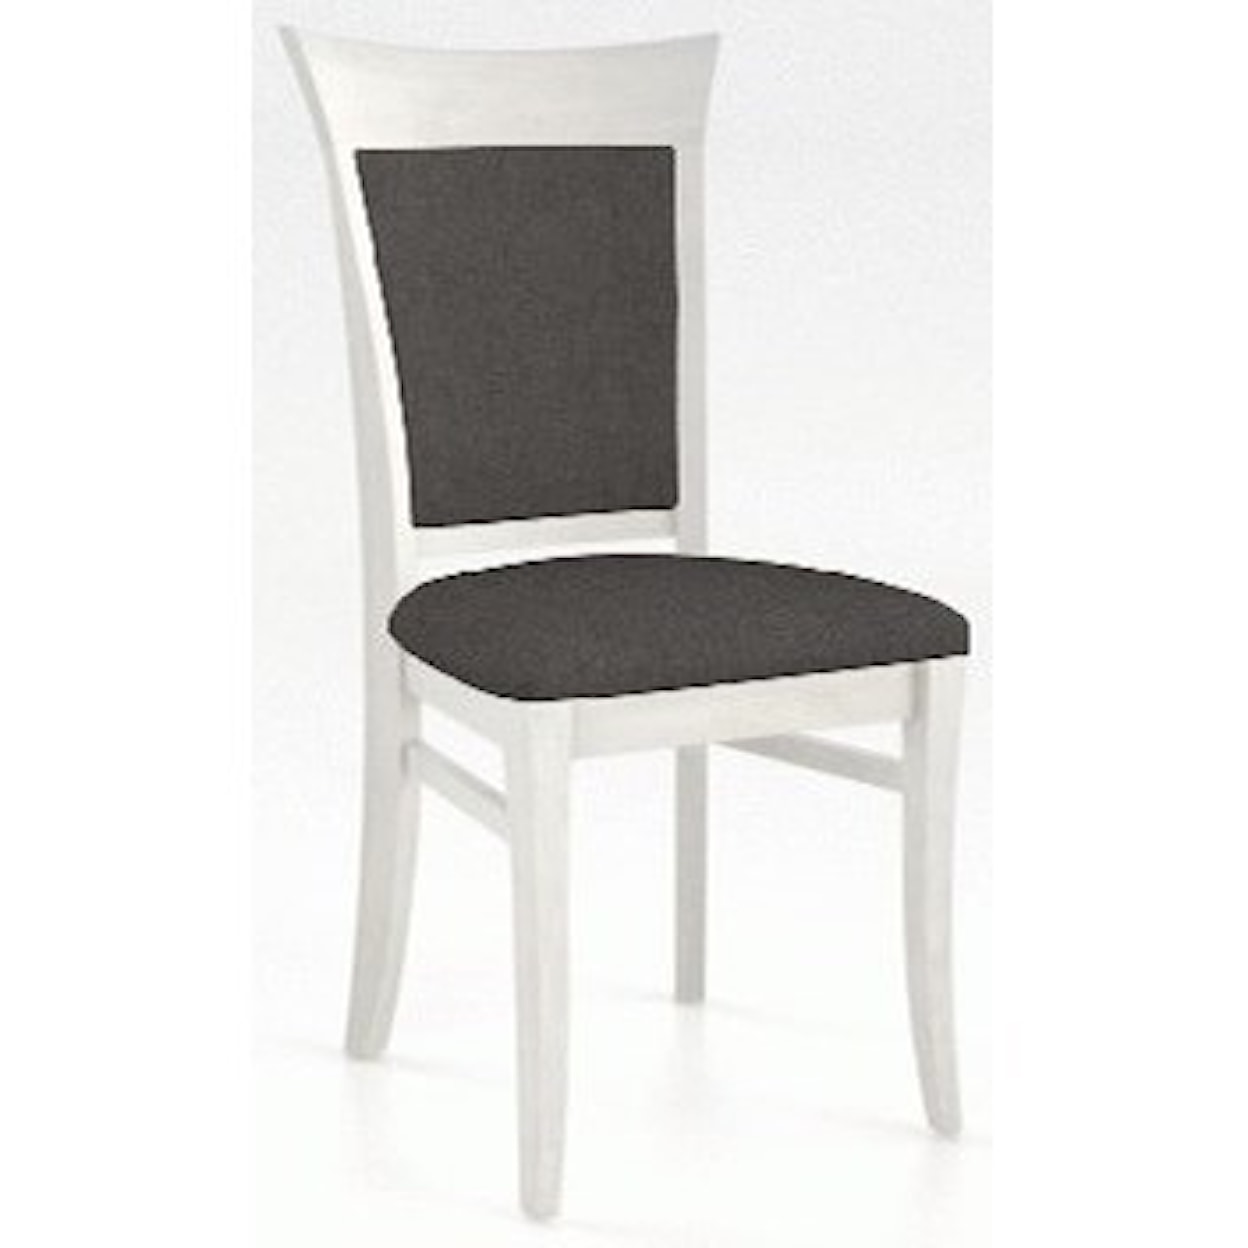 Canadel Canadel Customizable Side Chair